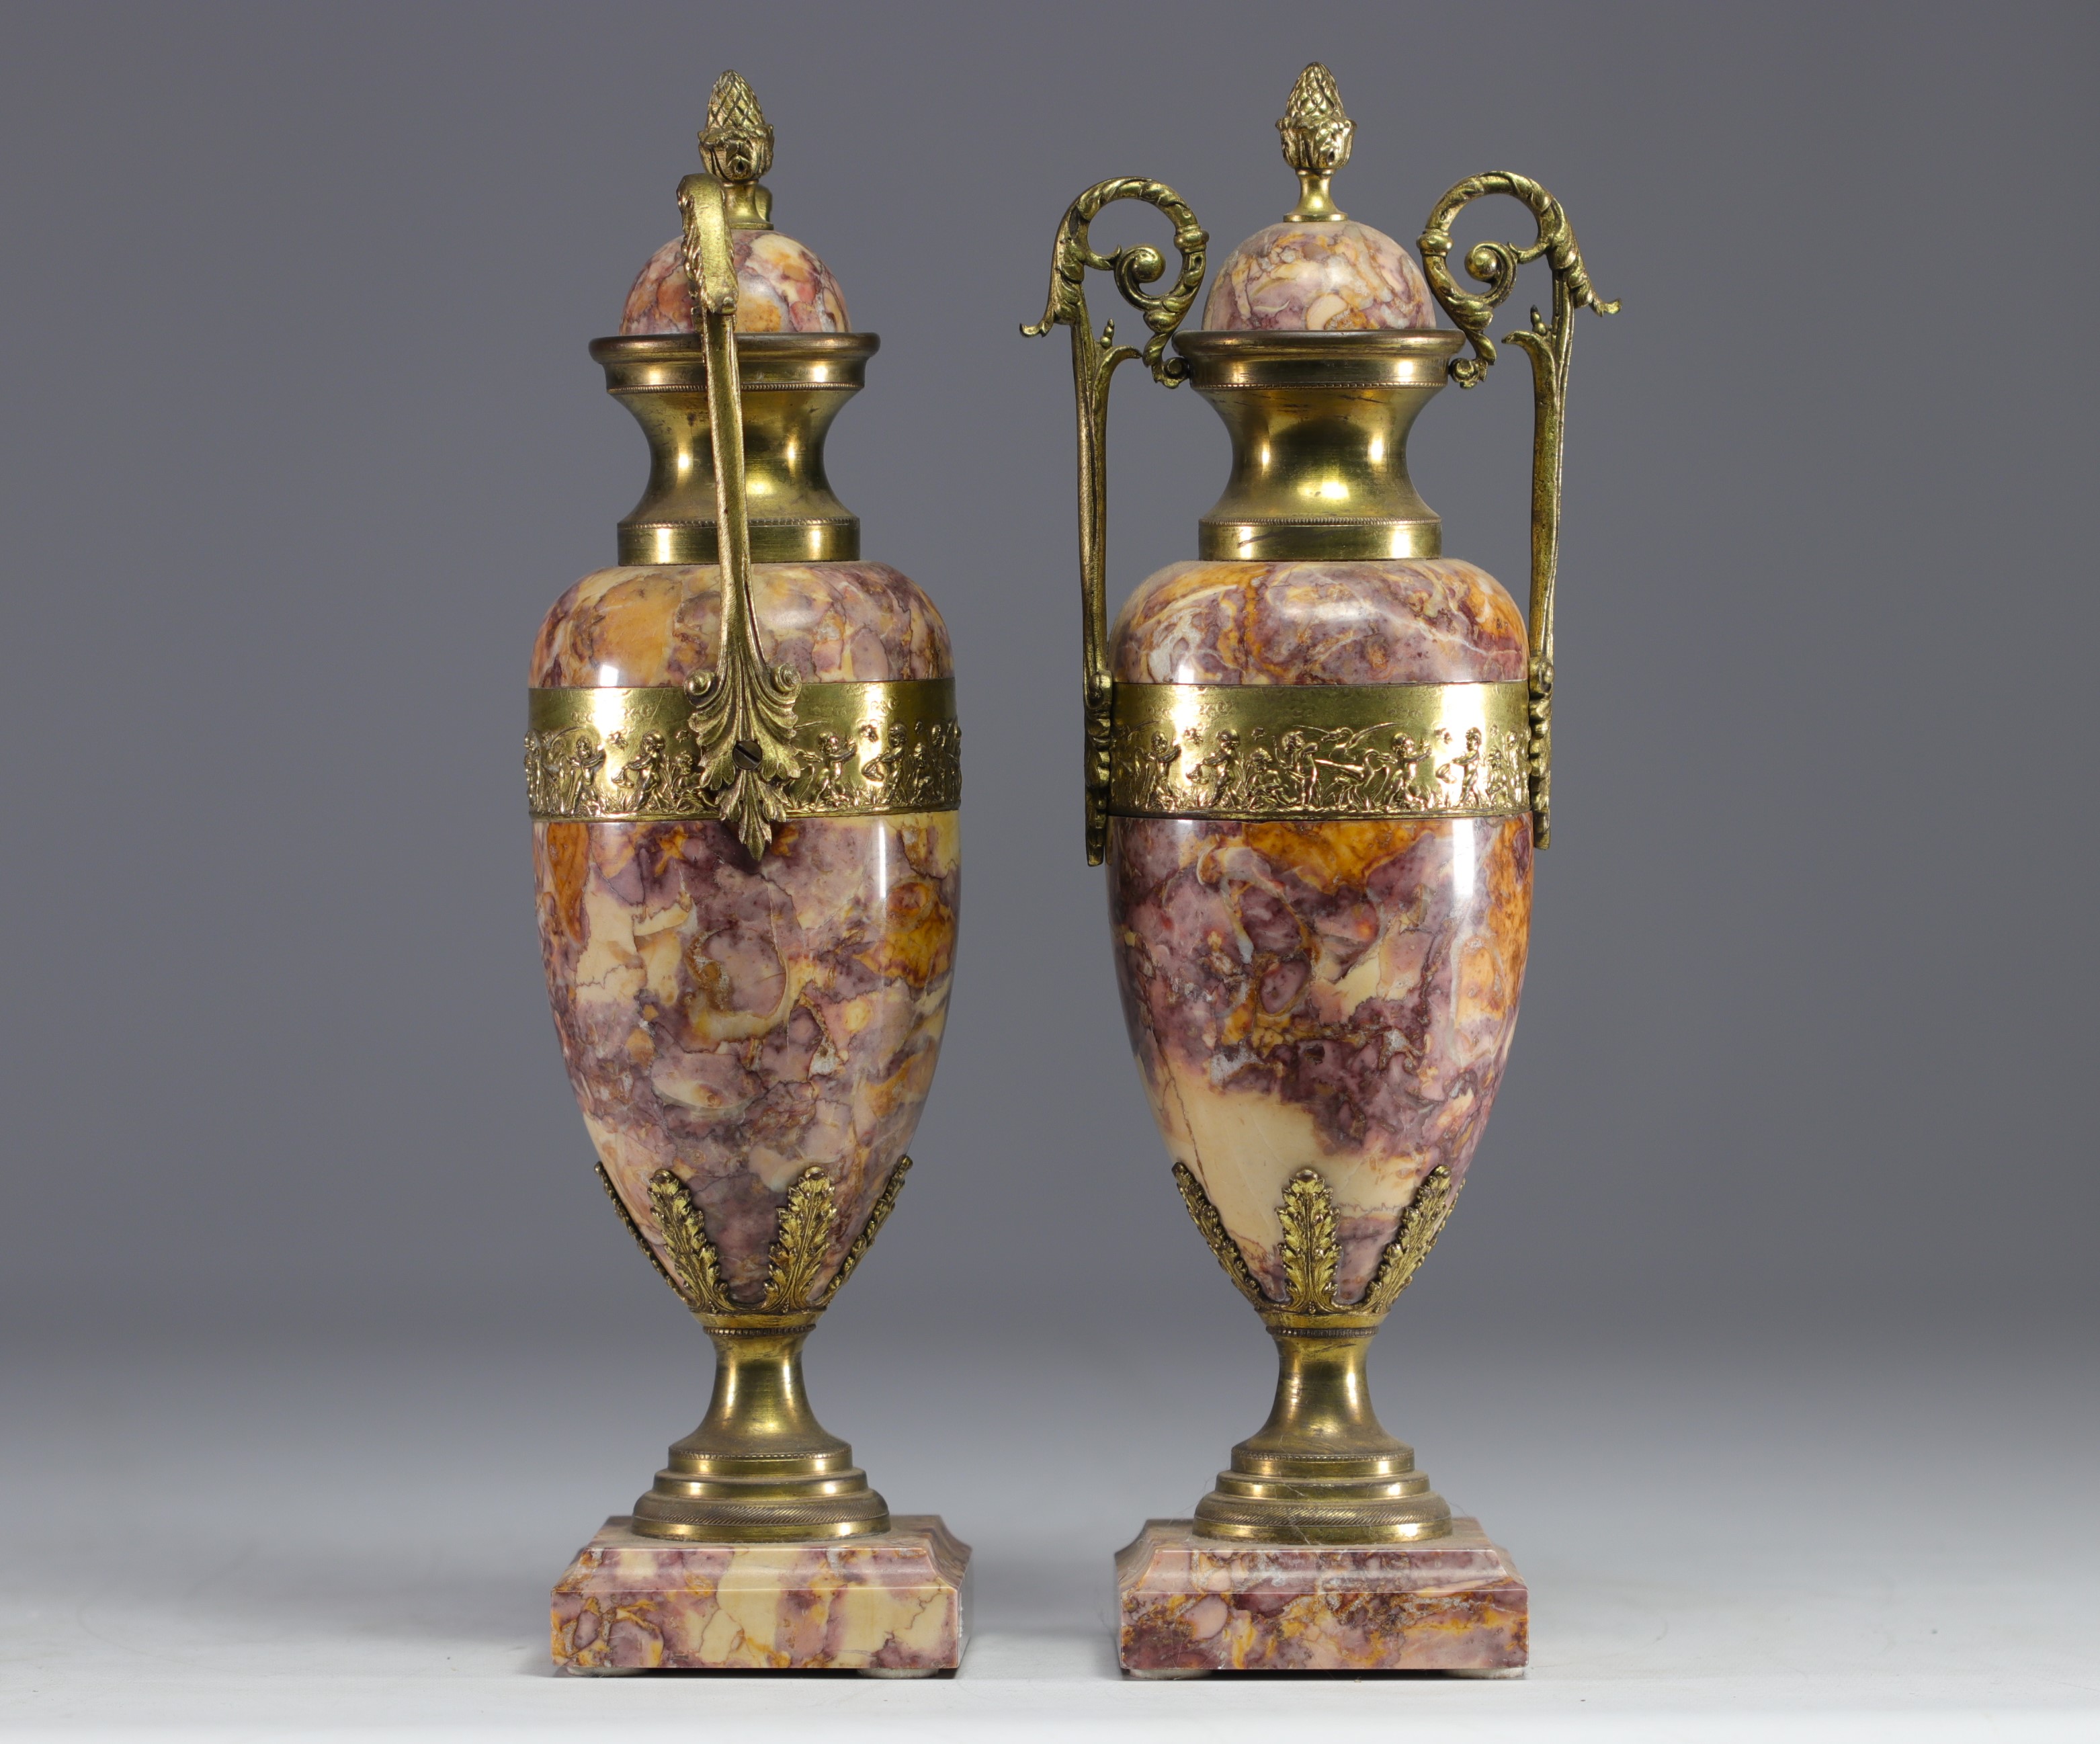 Pair of marble and gilt bronze "Frise aux Putti" cassolettes, 19th century. - Image 3 of 3